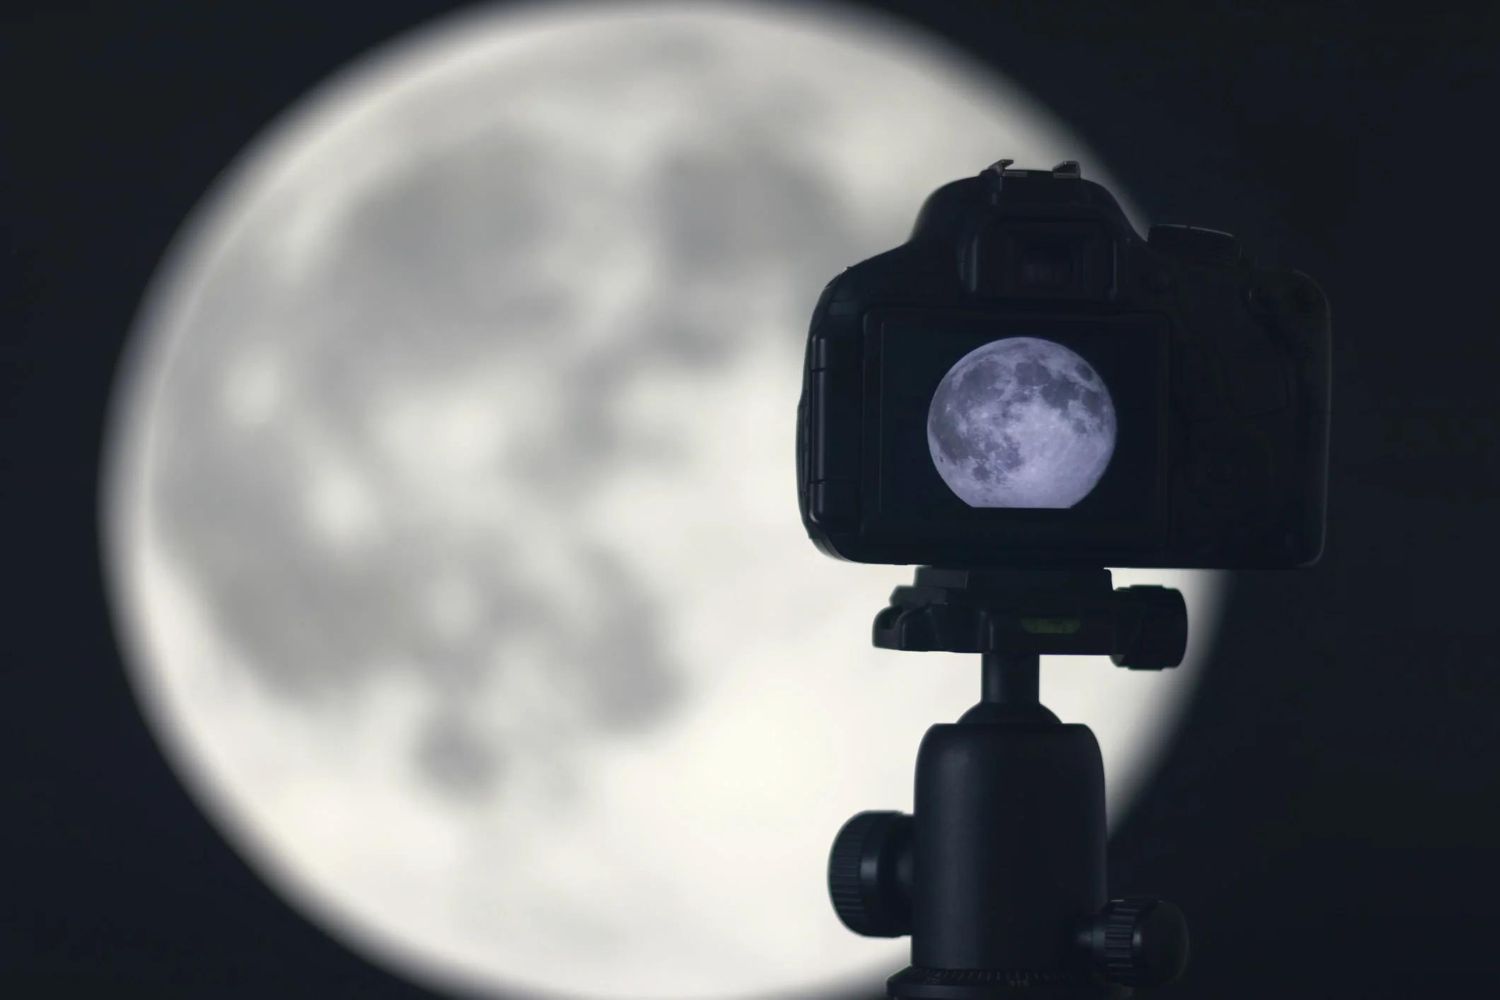 How To Take A Picture Of The Moon With A DSLR Camera